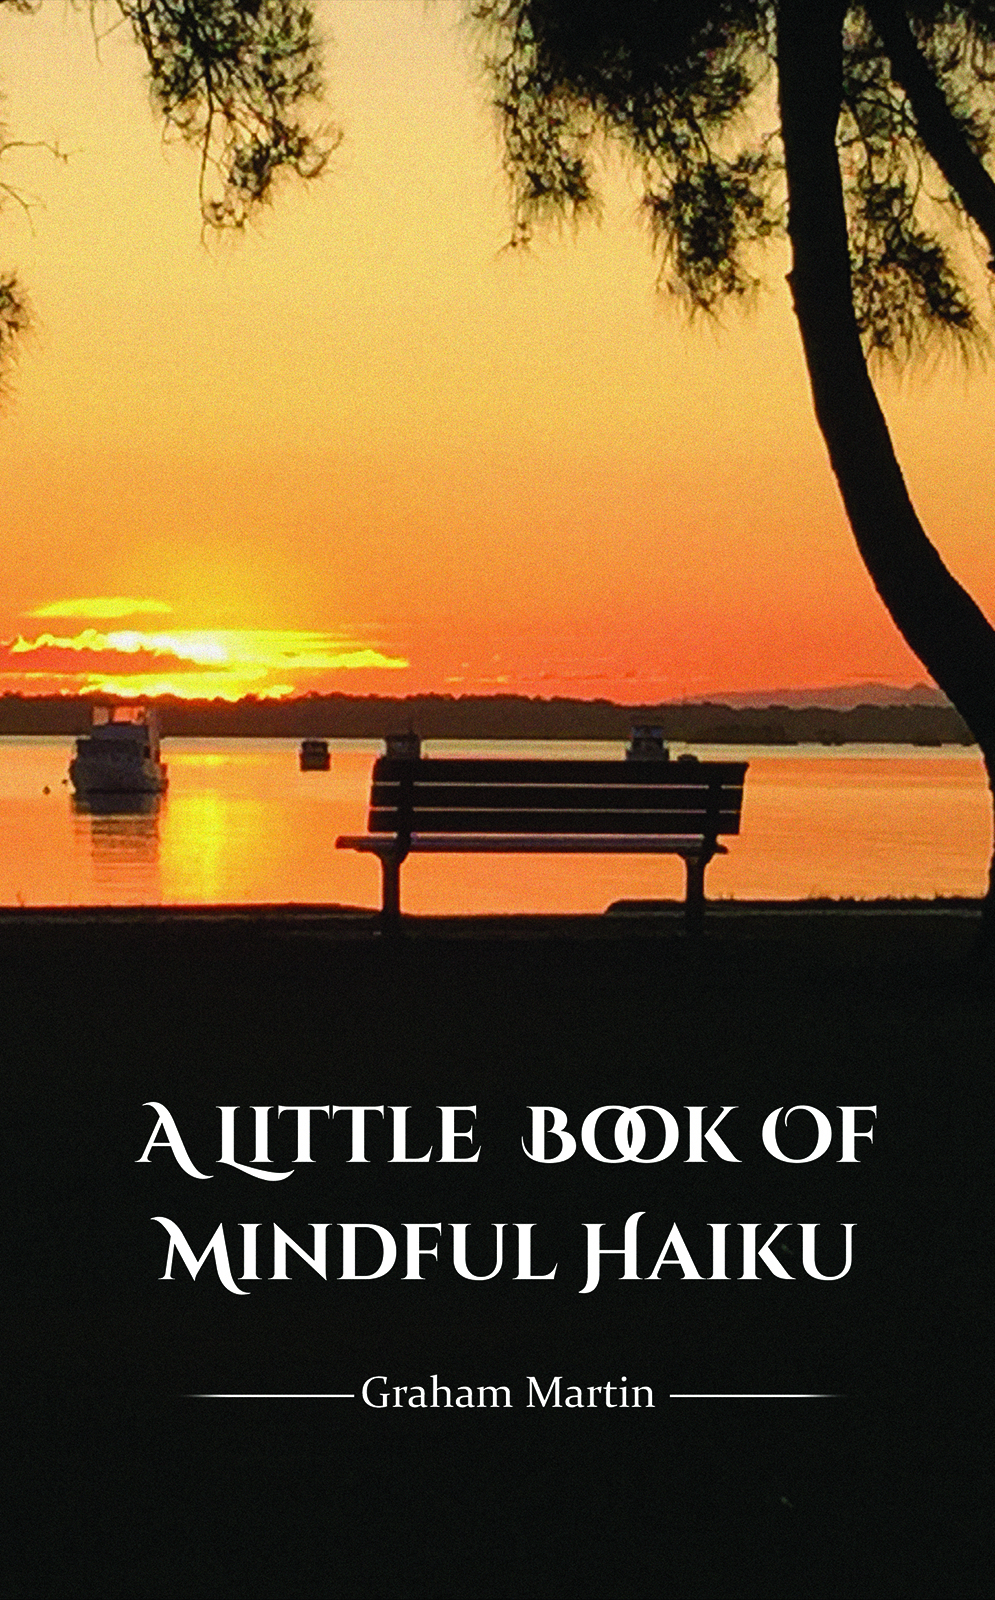 This image is the cover for the book A Little Book of Mindful Haiku